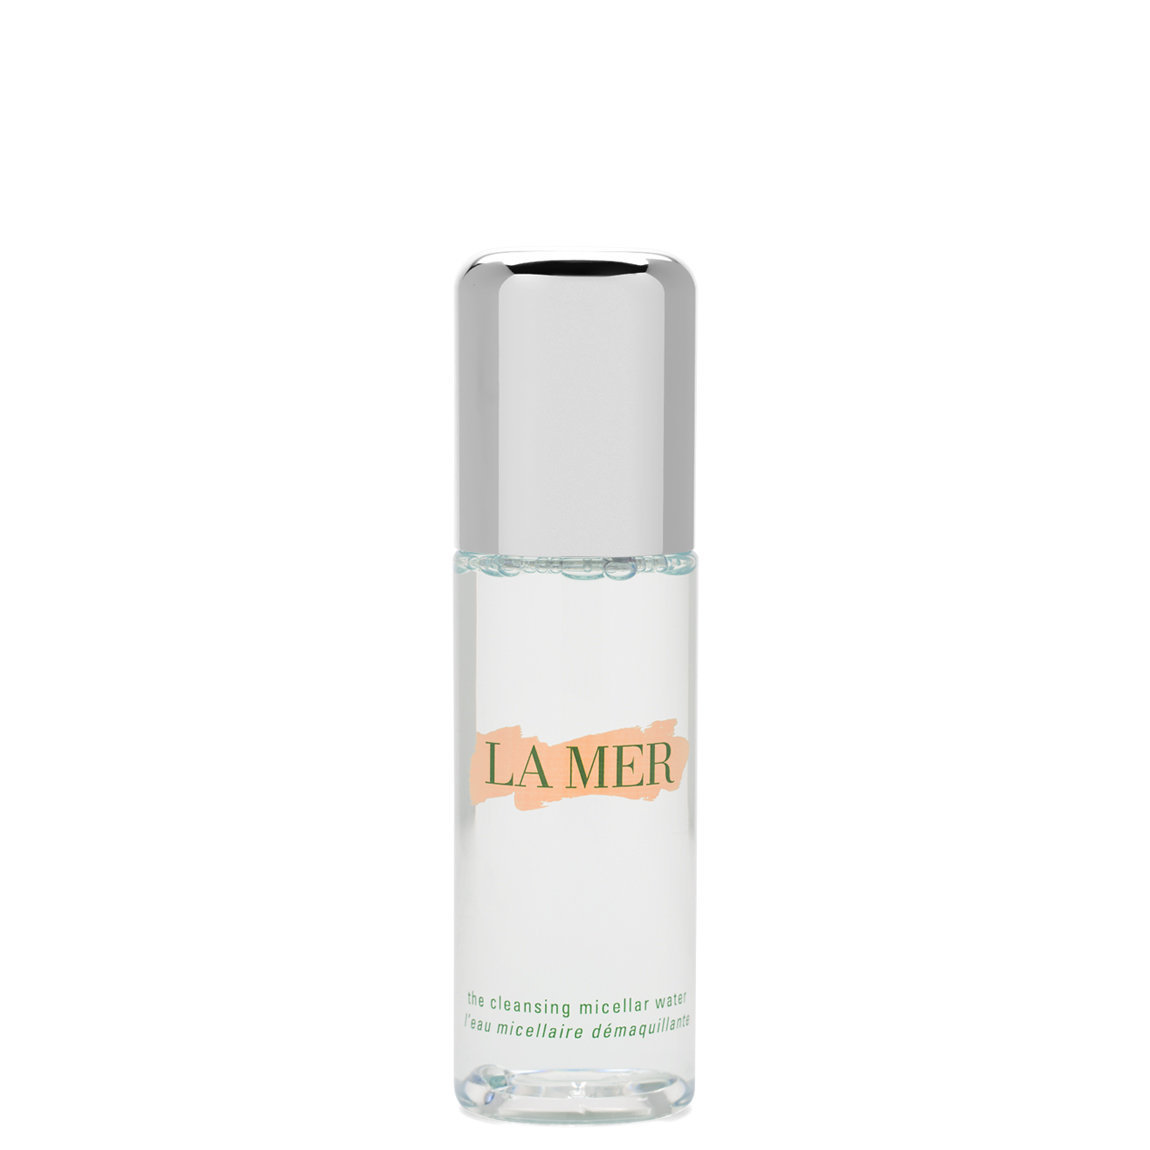 La Mer The Cleansing Micellar Water 3.4 oz alternative view 1 - product swatch.